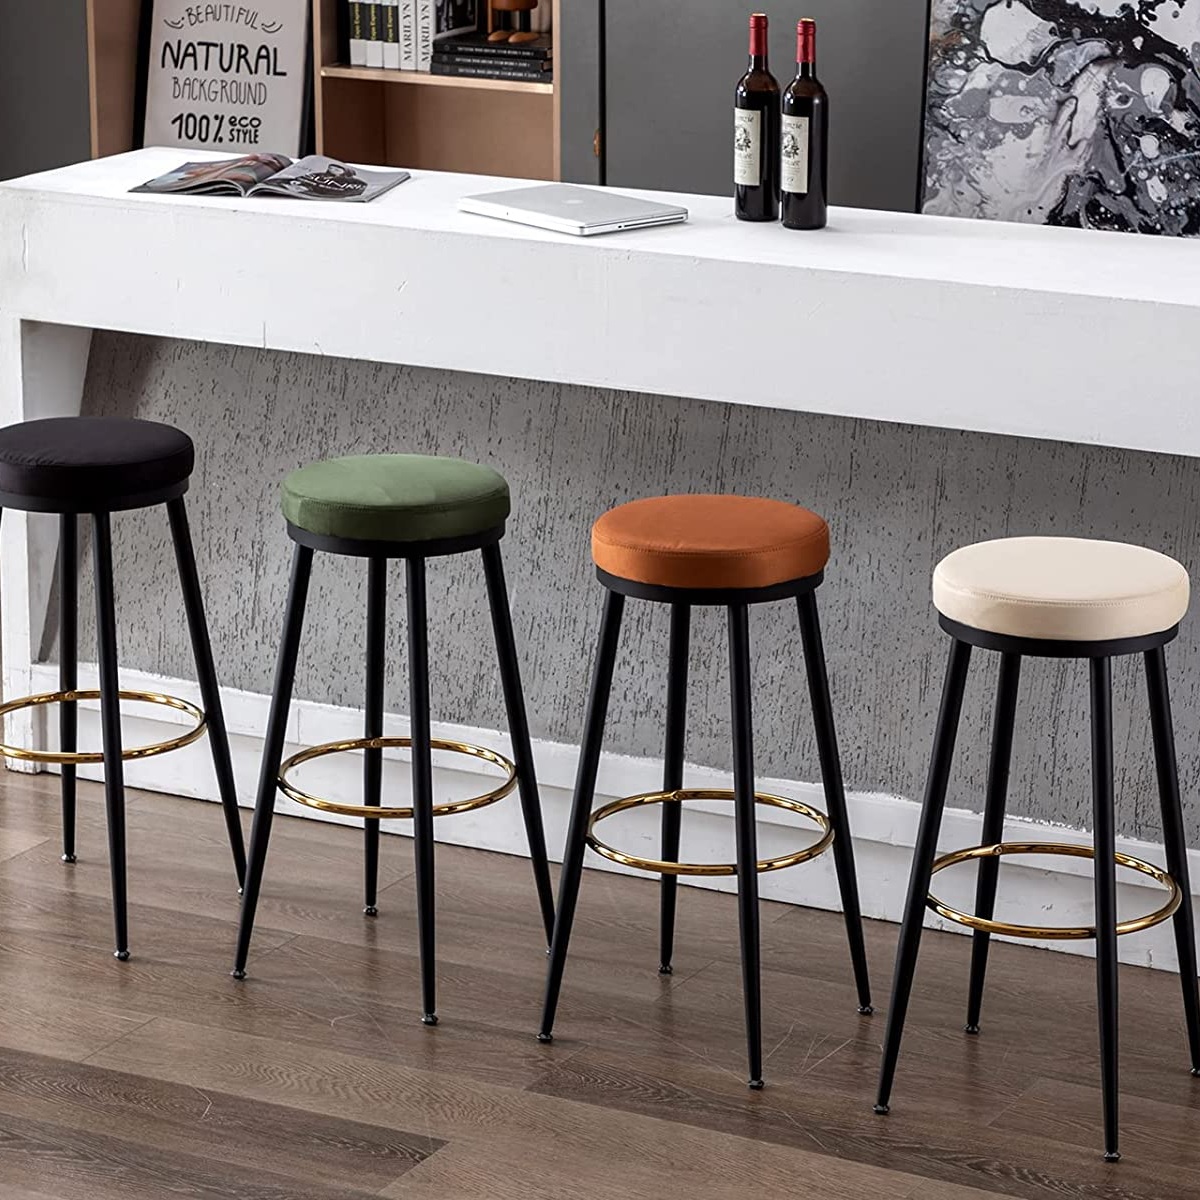 51 Upholstered Bar Stools That Blend Comfort and Style Seamlessly